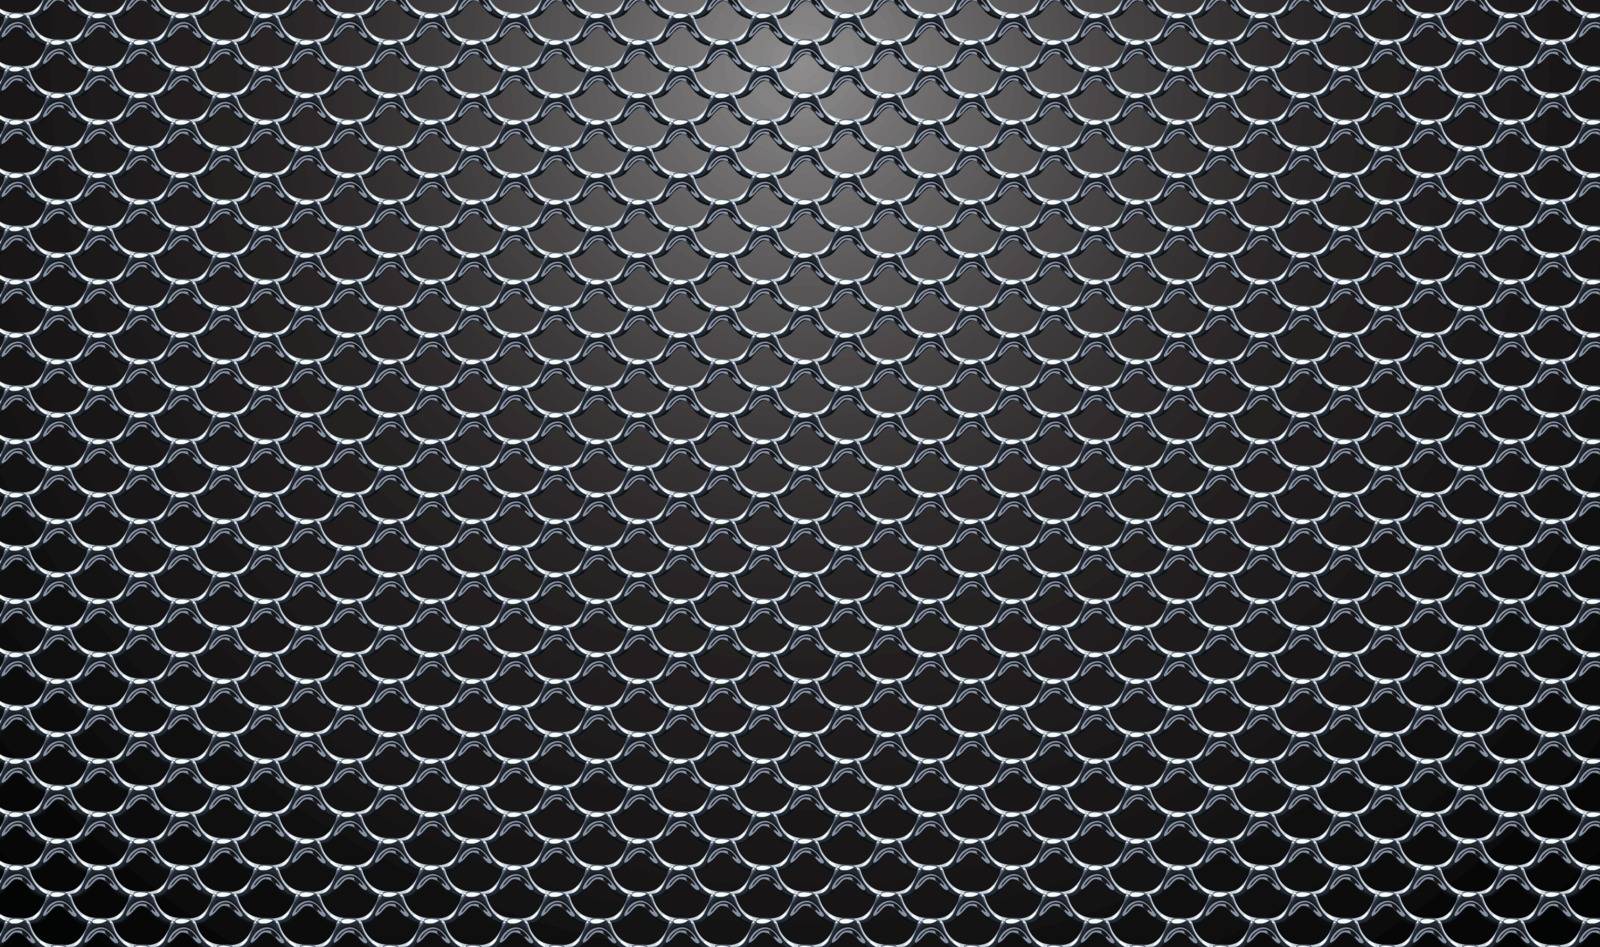 Steel mesh realistic vector structure black background